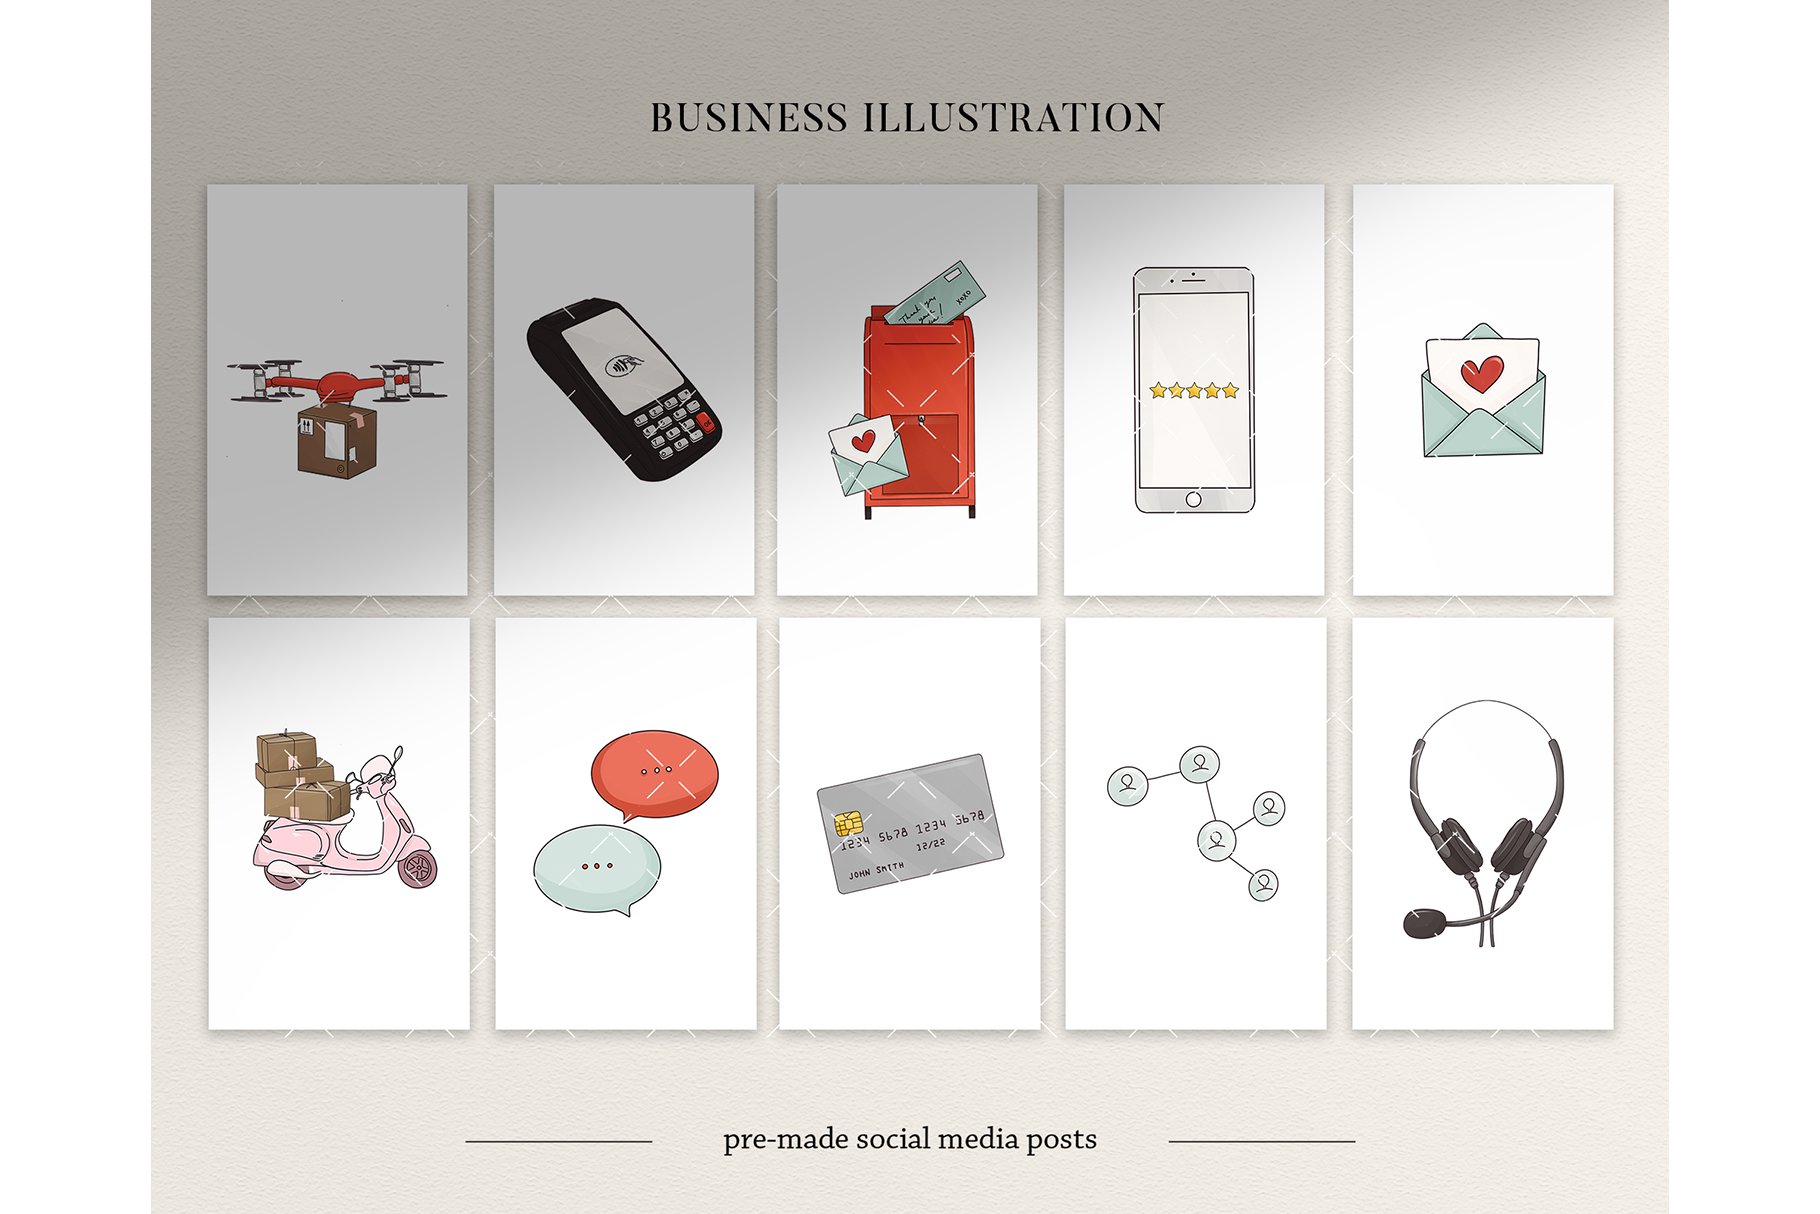 A series of business illustrations of various items.